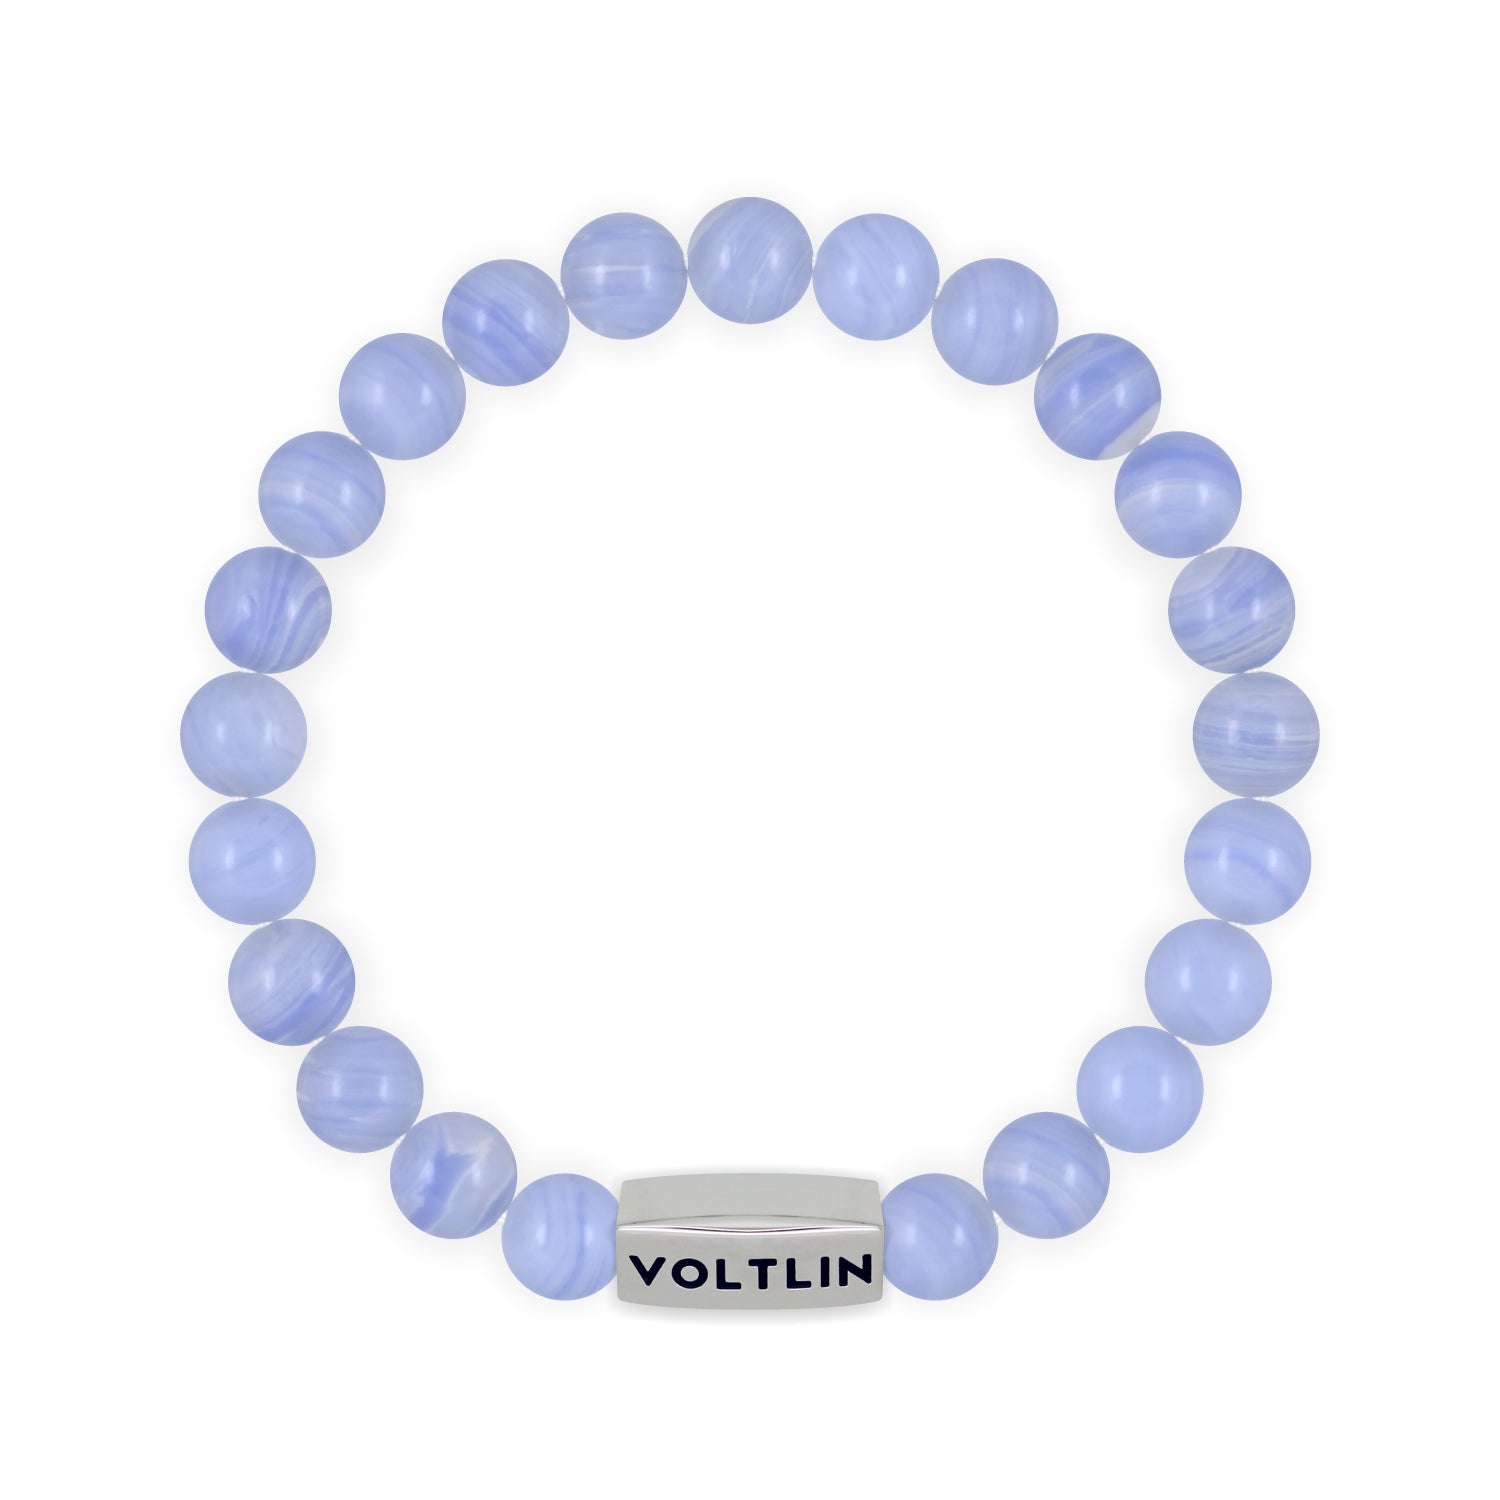 Front view of an 8mm Blue Lace Agate beaded stretch bracelet with silver stainless steel logo bead made by Voltlin